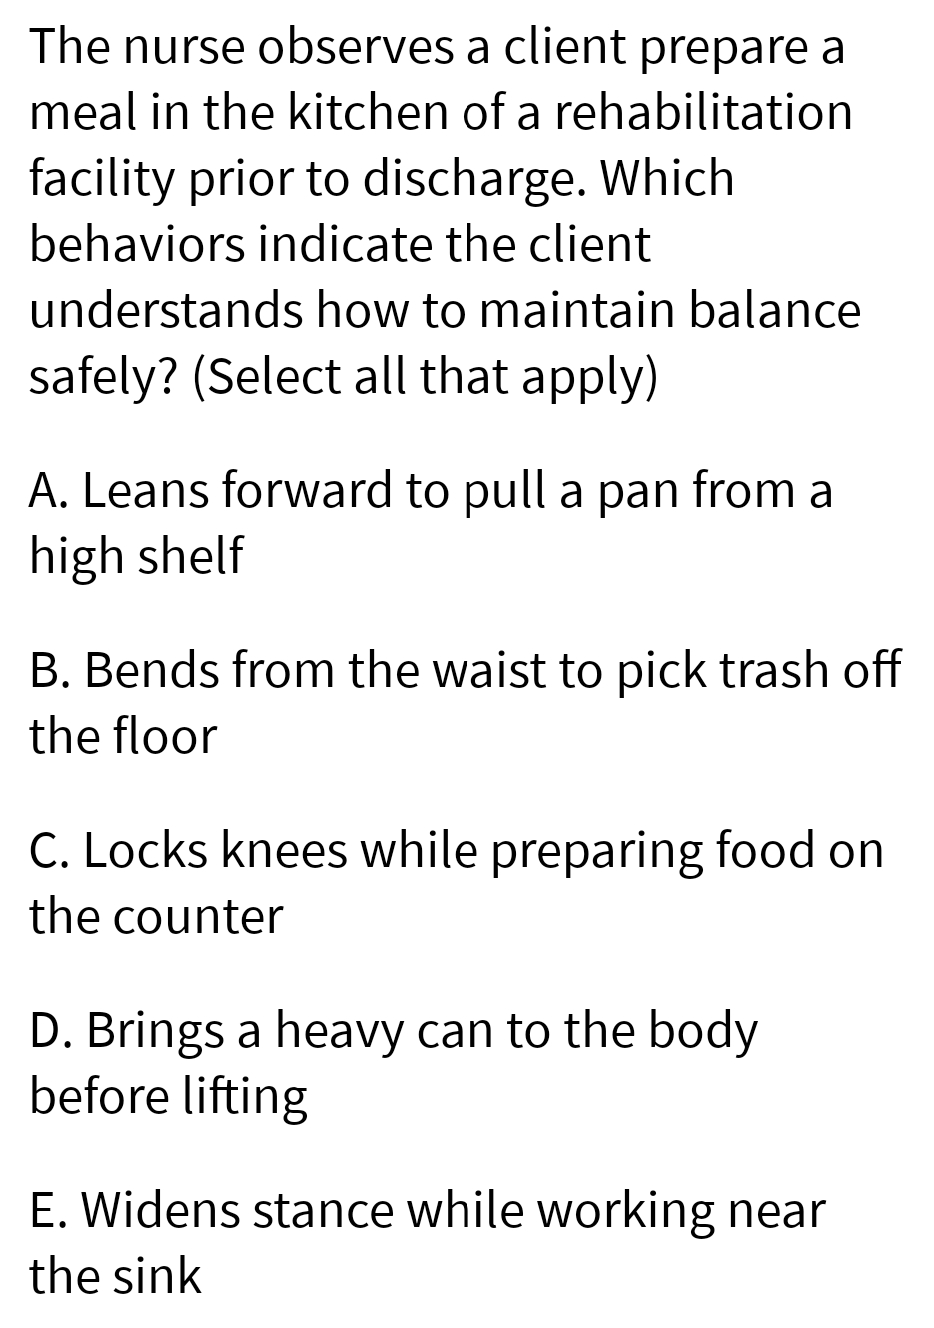 The nurse observes a client prepare a
meal in the kitchen of a rehabilitation
facility prior to discharge. Which
behaviors indicate the client
understands how to maintain balance
safely? (Select all that apply)
A. Leans forward to pull a pan from a
high shelf
B. Bends from the waist to pick trash off
the floor
C. Locks knees while preparing food on
the counter
D. Brings a heavy can to the body
before lifting
E. Widens stance while working near
the sink